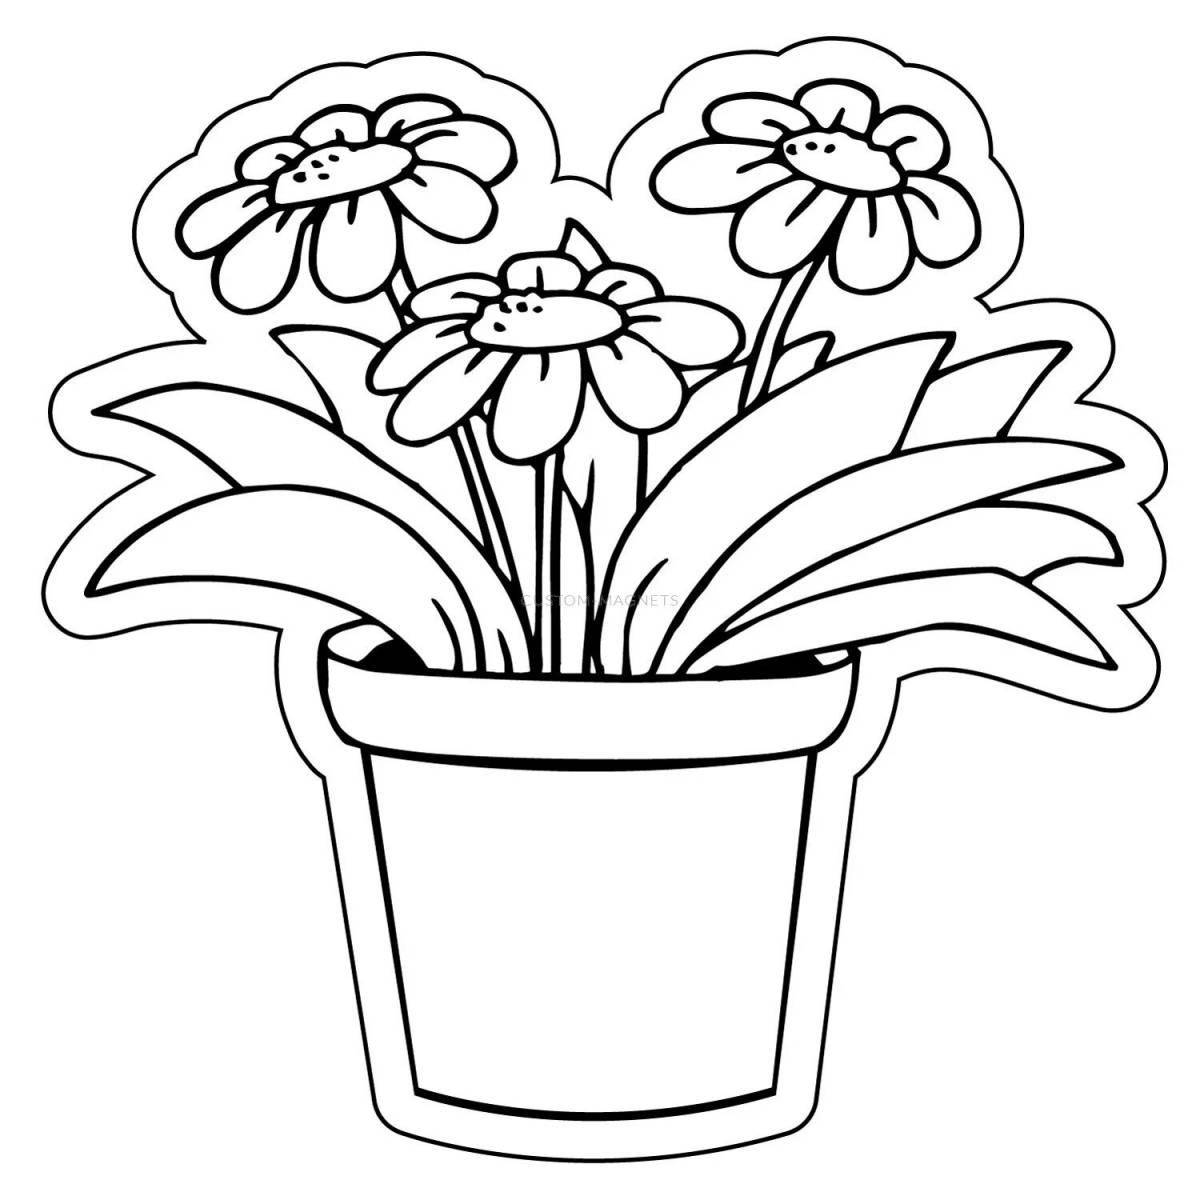 Coloring page dazzling flower pot